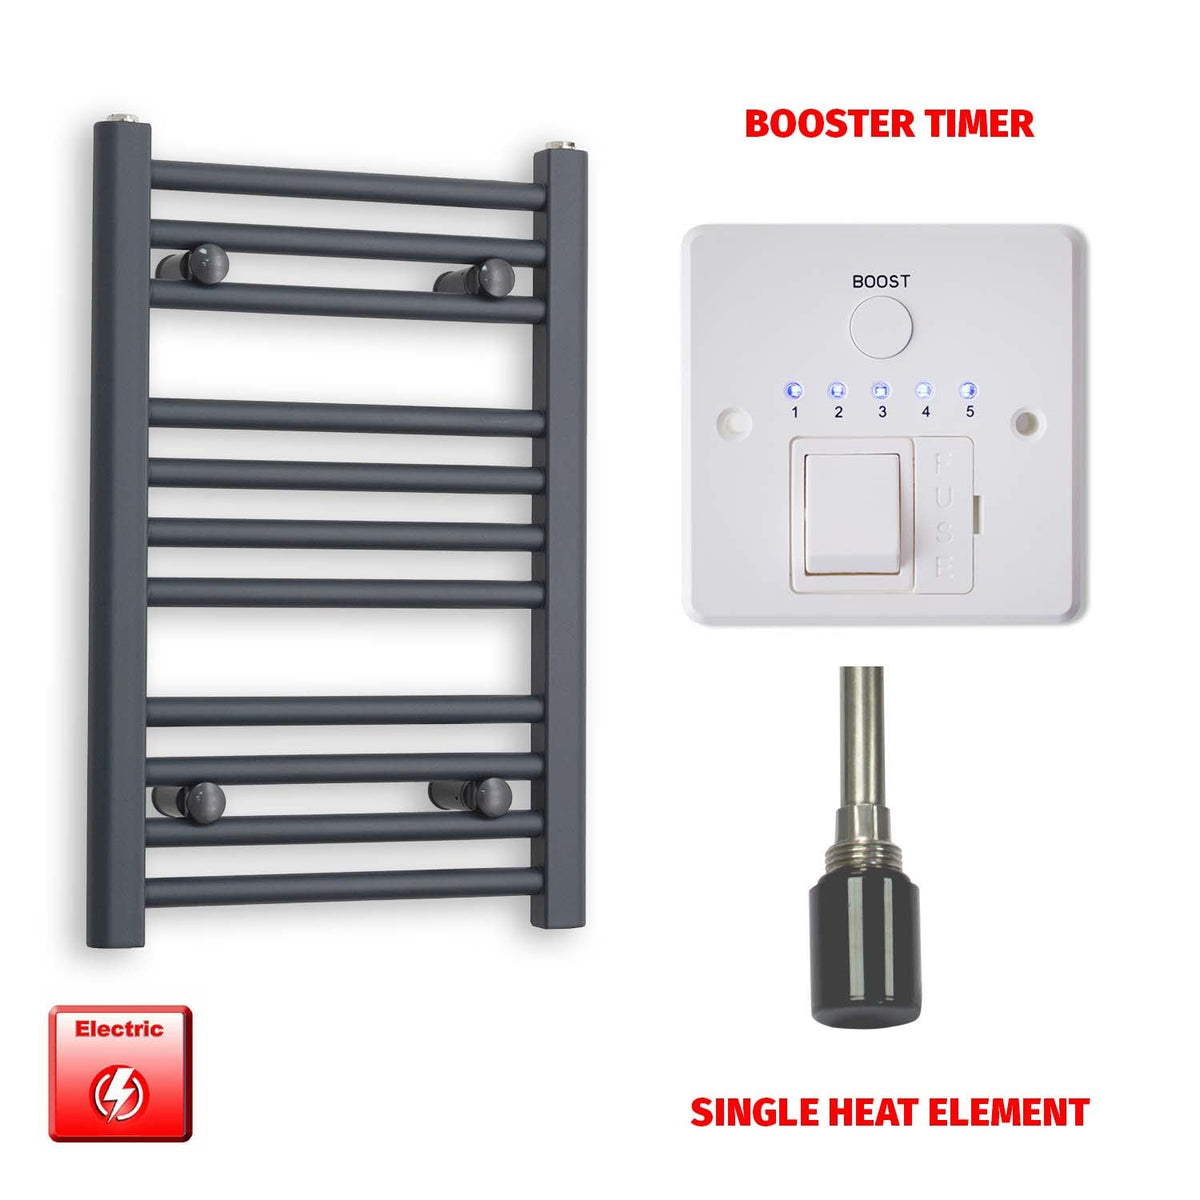 600mm High 400mm Wide Flat Anthracite Pre-Filled Electric Heated Towel Rail Radiator HTR Single heat element Booster timer